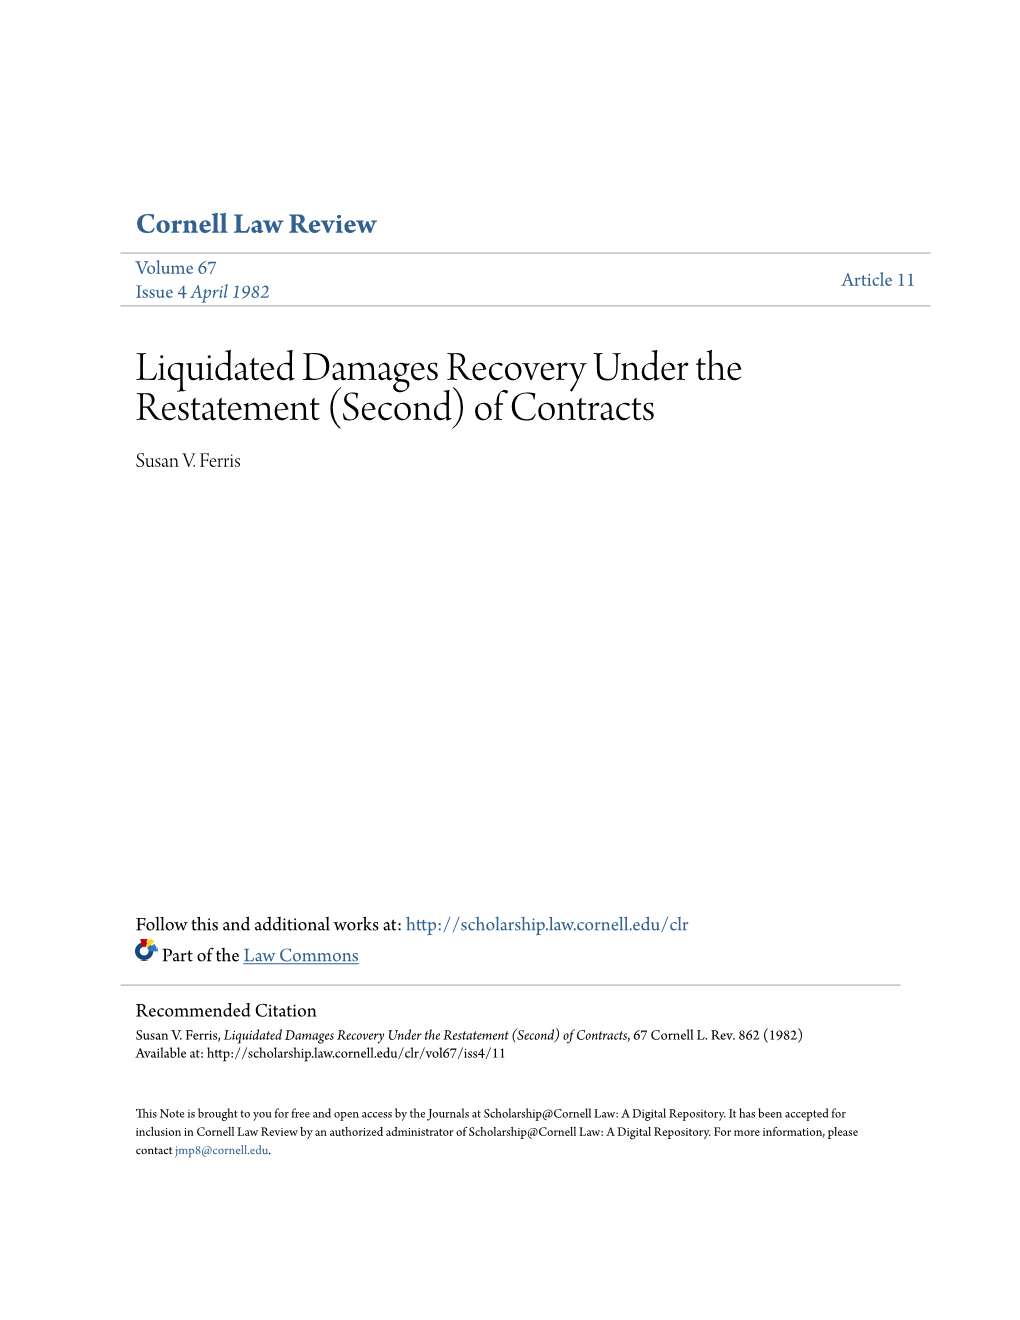 Liquidated Damages Recovery Under the Restatement (Second) of Contracts Susan V